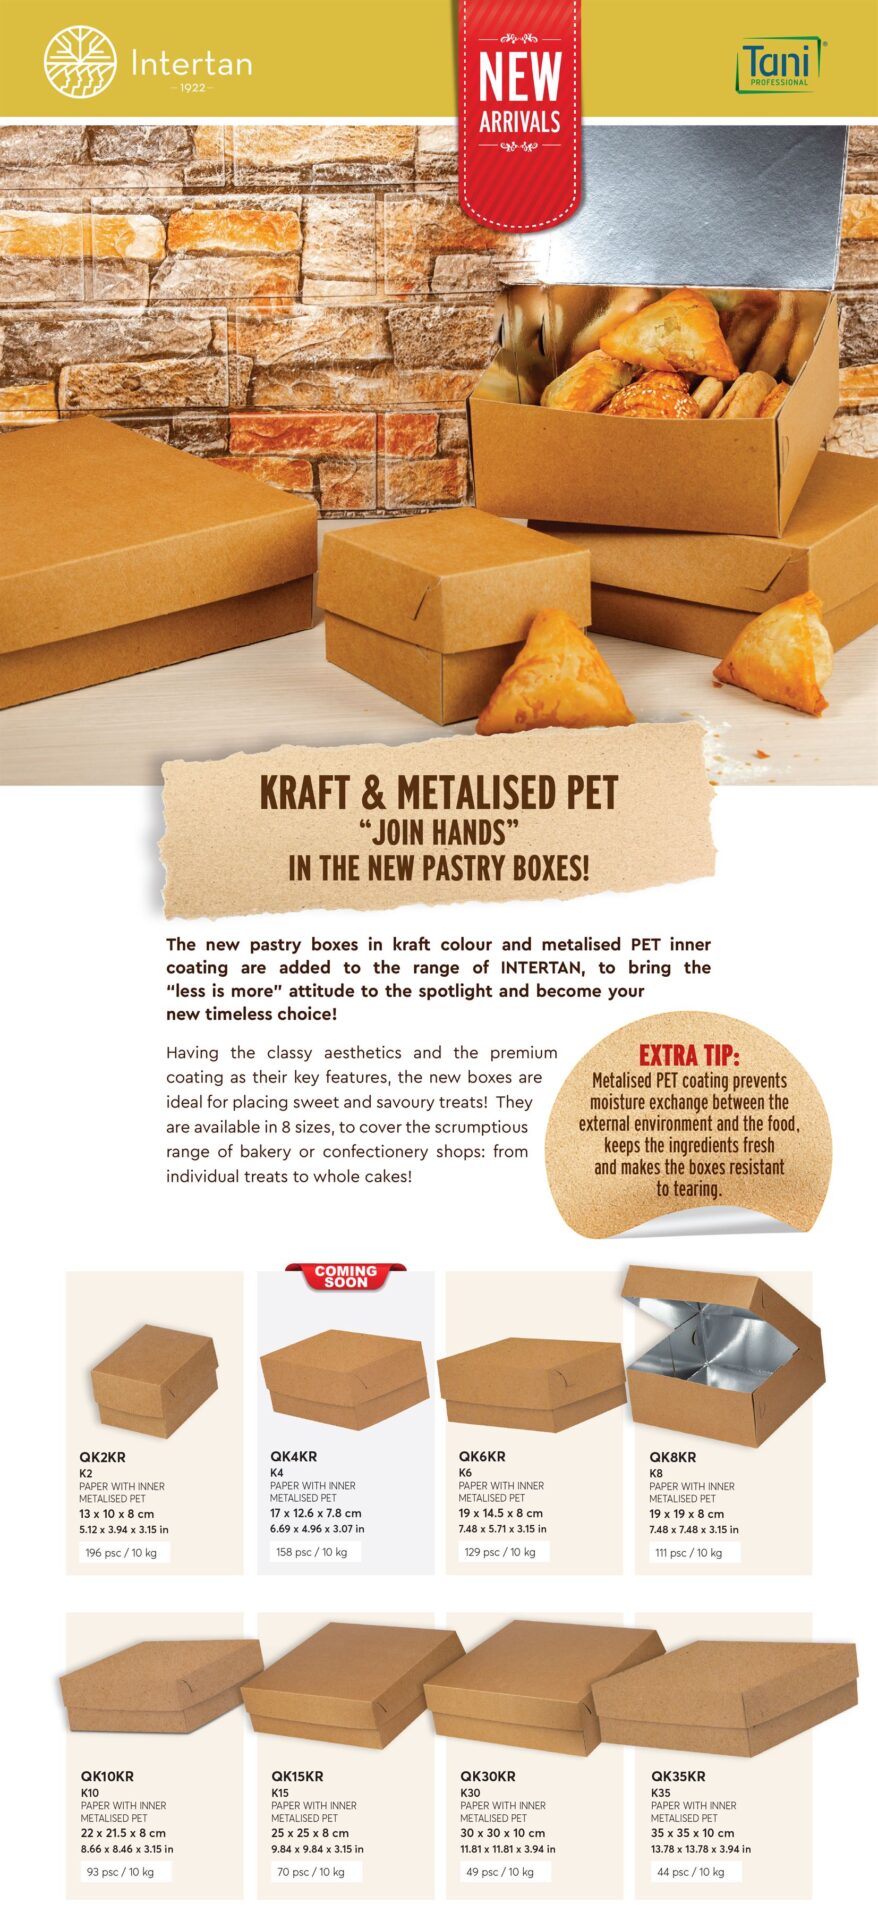 Kraft pastry boxes with metalised PET inner coating Newsletter | Intertan S.A.